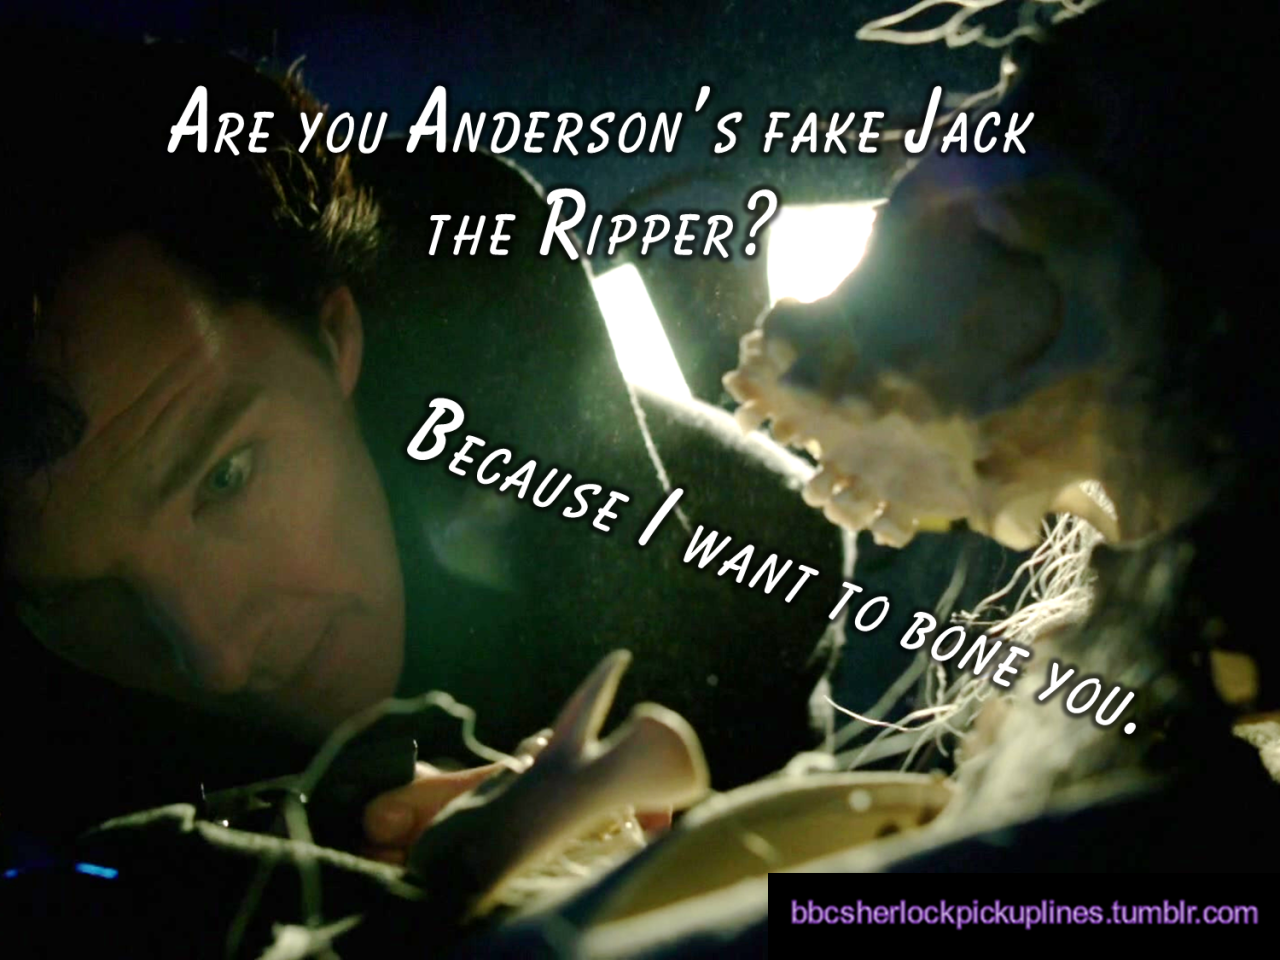 &ldquo;Are you Anderson&rsquo;s fake Jack the Ripper? Because I want to bone